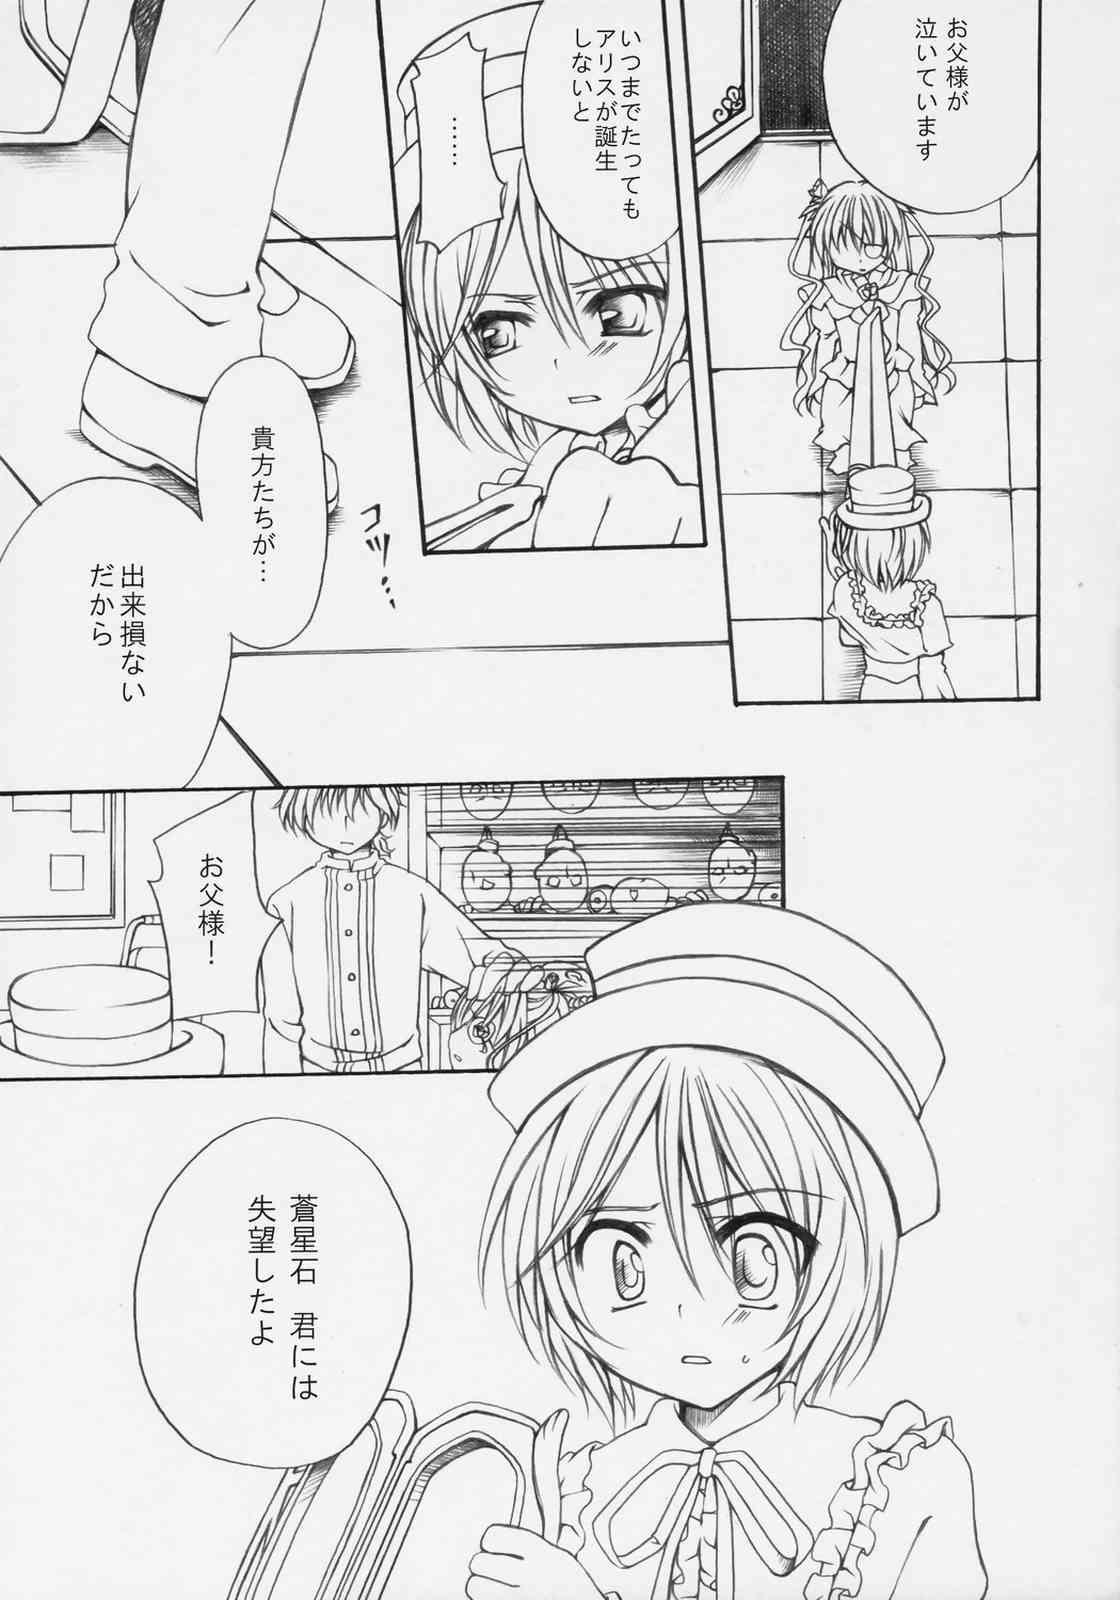 Gay Group DANCING DOLL - Rozen maiden Beurette - Page 4